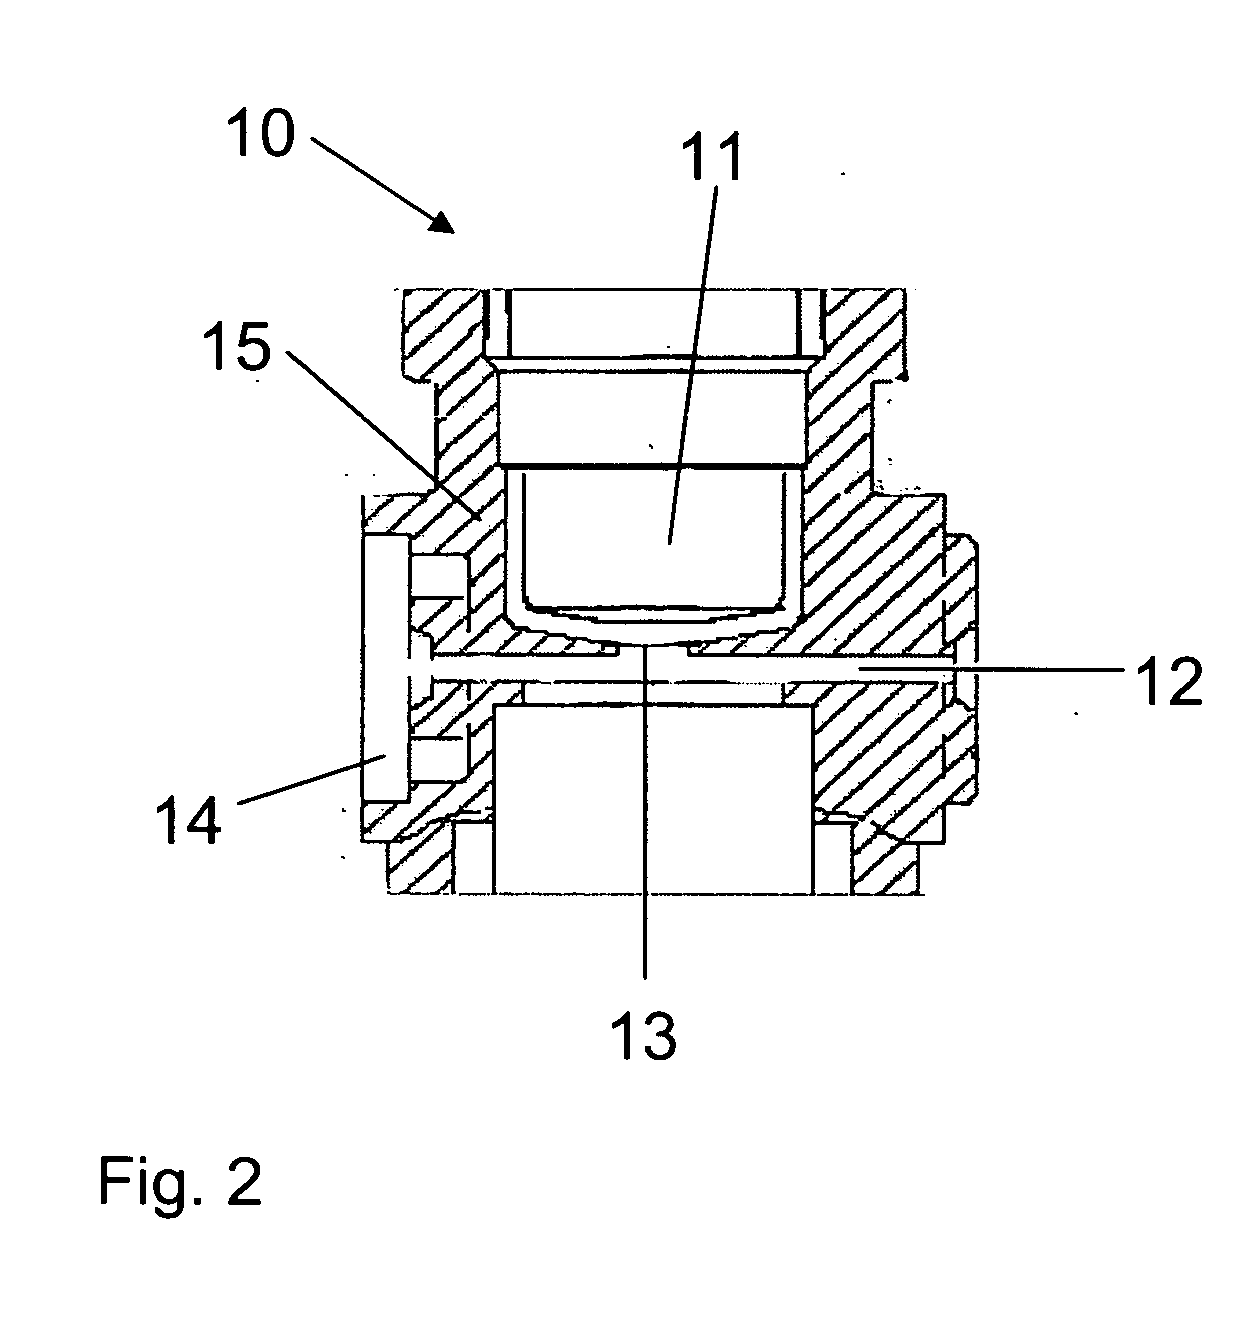 Process for hydrophilizing surfaces of fluidic components and systems